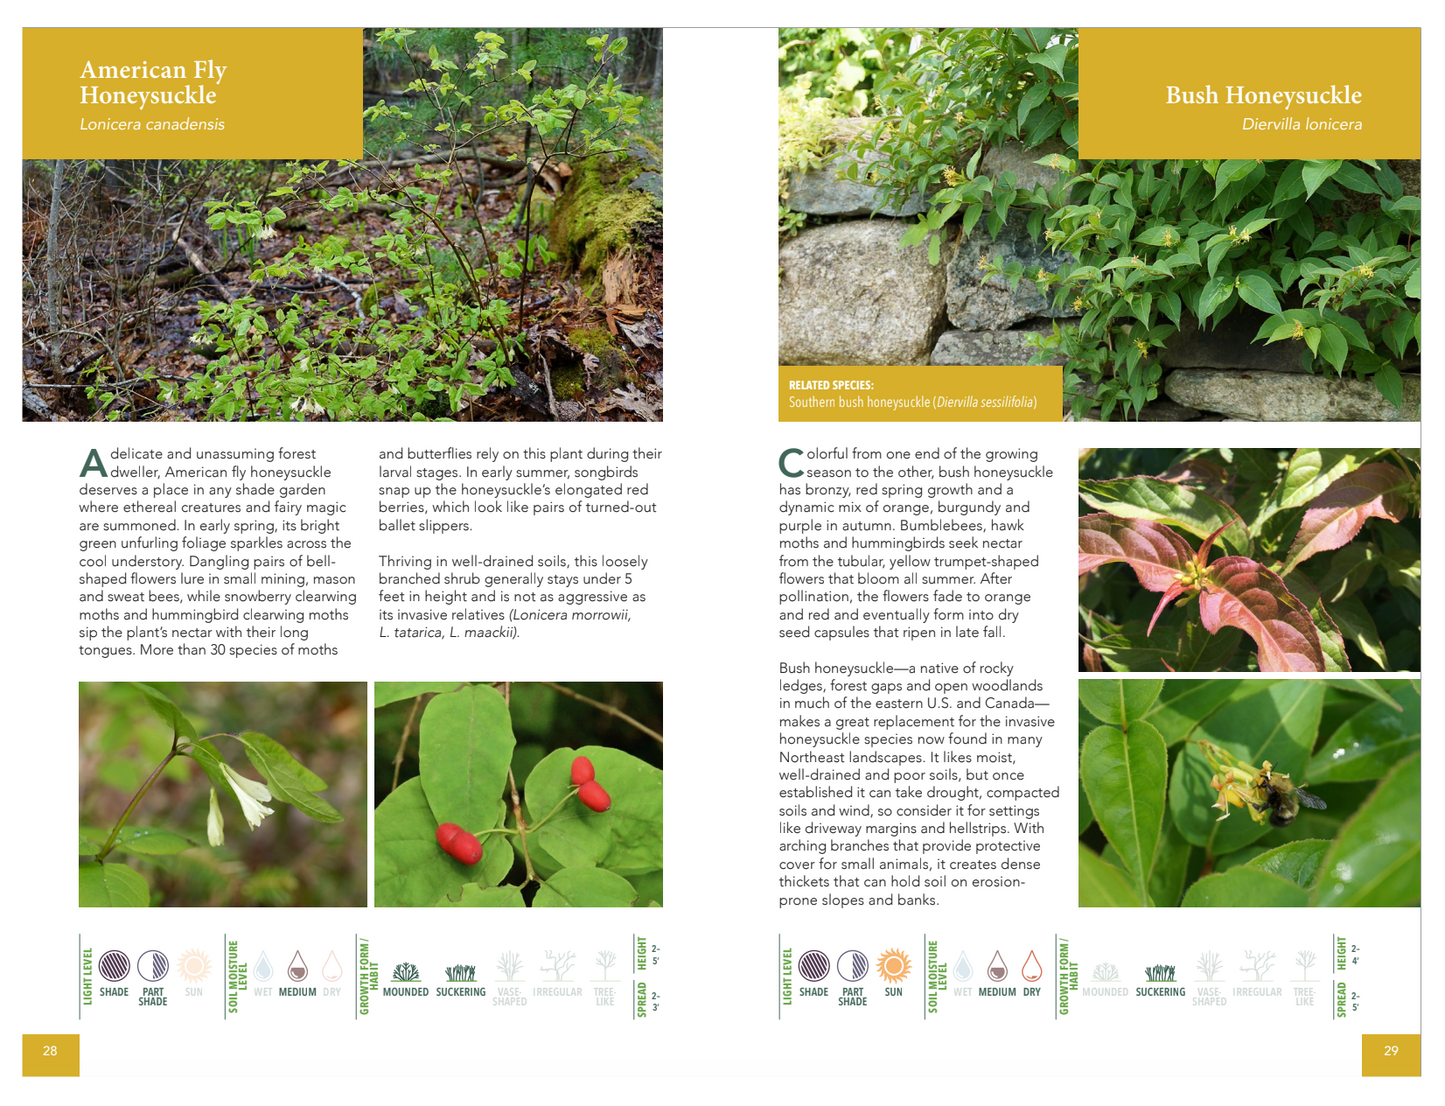 Native Shrubs for Northeast Landscapes: A Wild Seed Project Guide